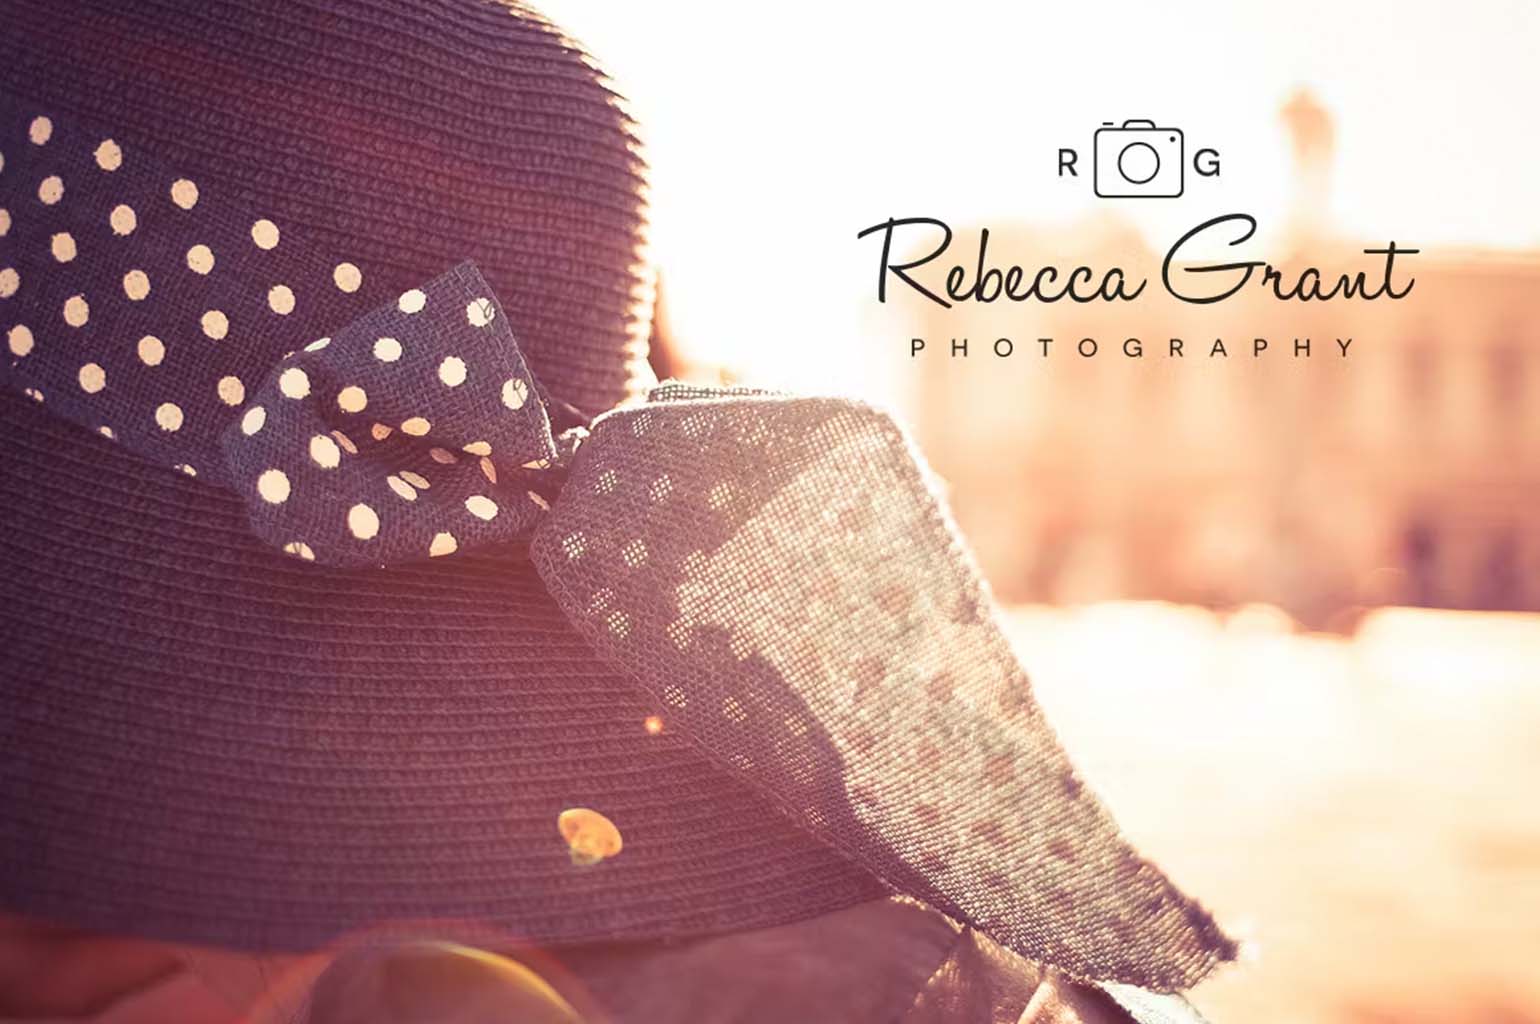 Photographer Logo Designs: Key Elements for a Strong Brand Identity